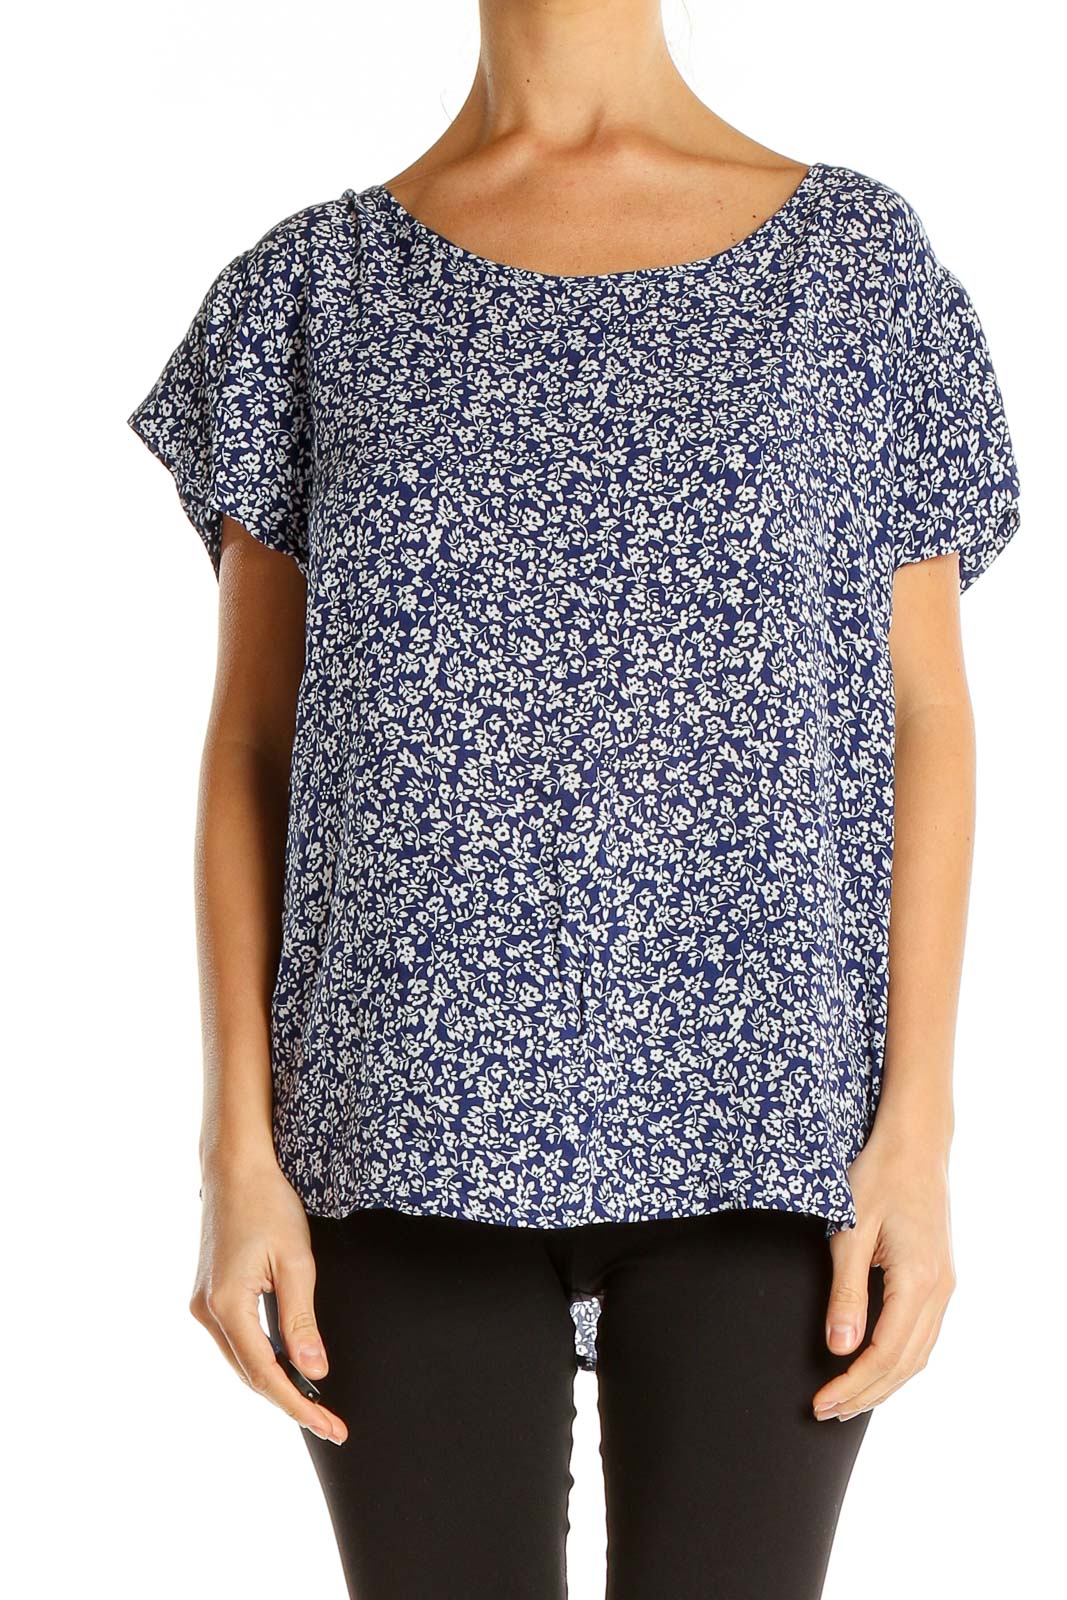 Blue Floral Print Casual Top Front